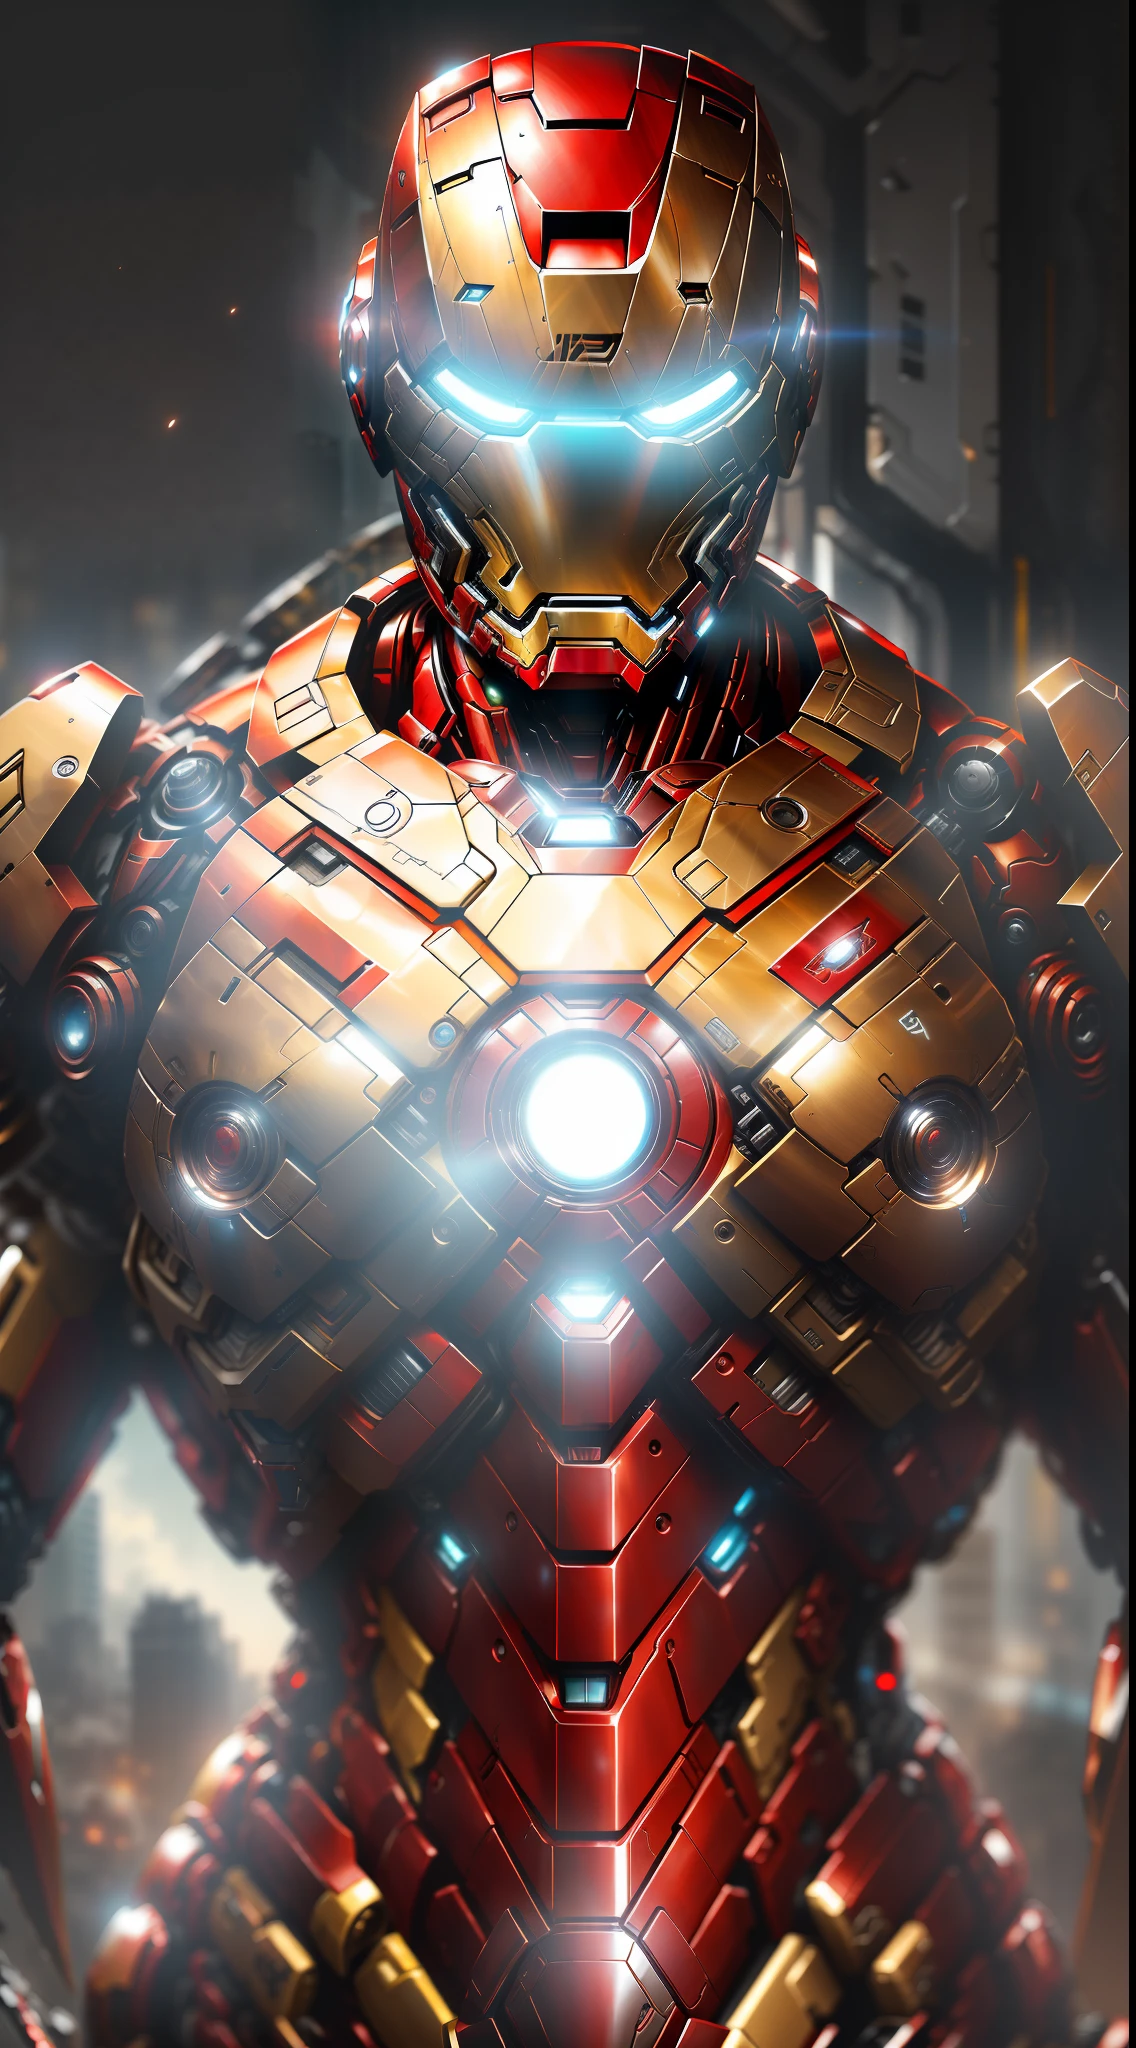 Iron Man 1872 from Marvel photo, biomechanical, complex robot, full growth, hyper-realistic, insane small details, extremely clean lines, cyberpunk aesthetic, a masterpiece presented at Zbrush Central